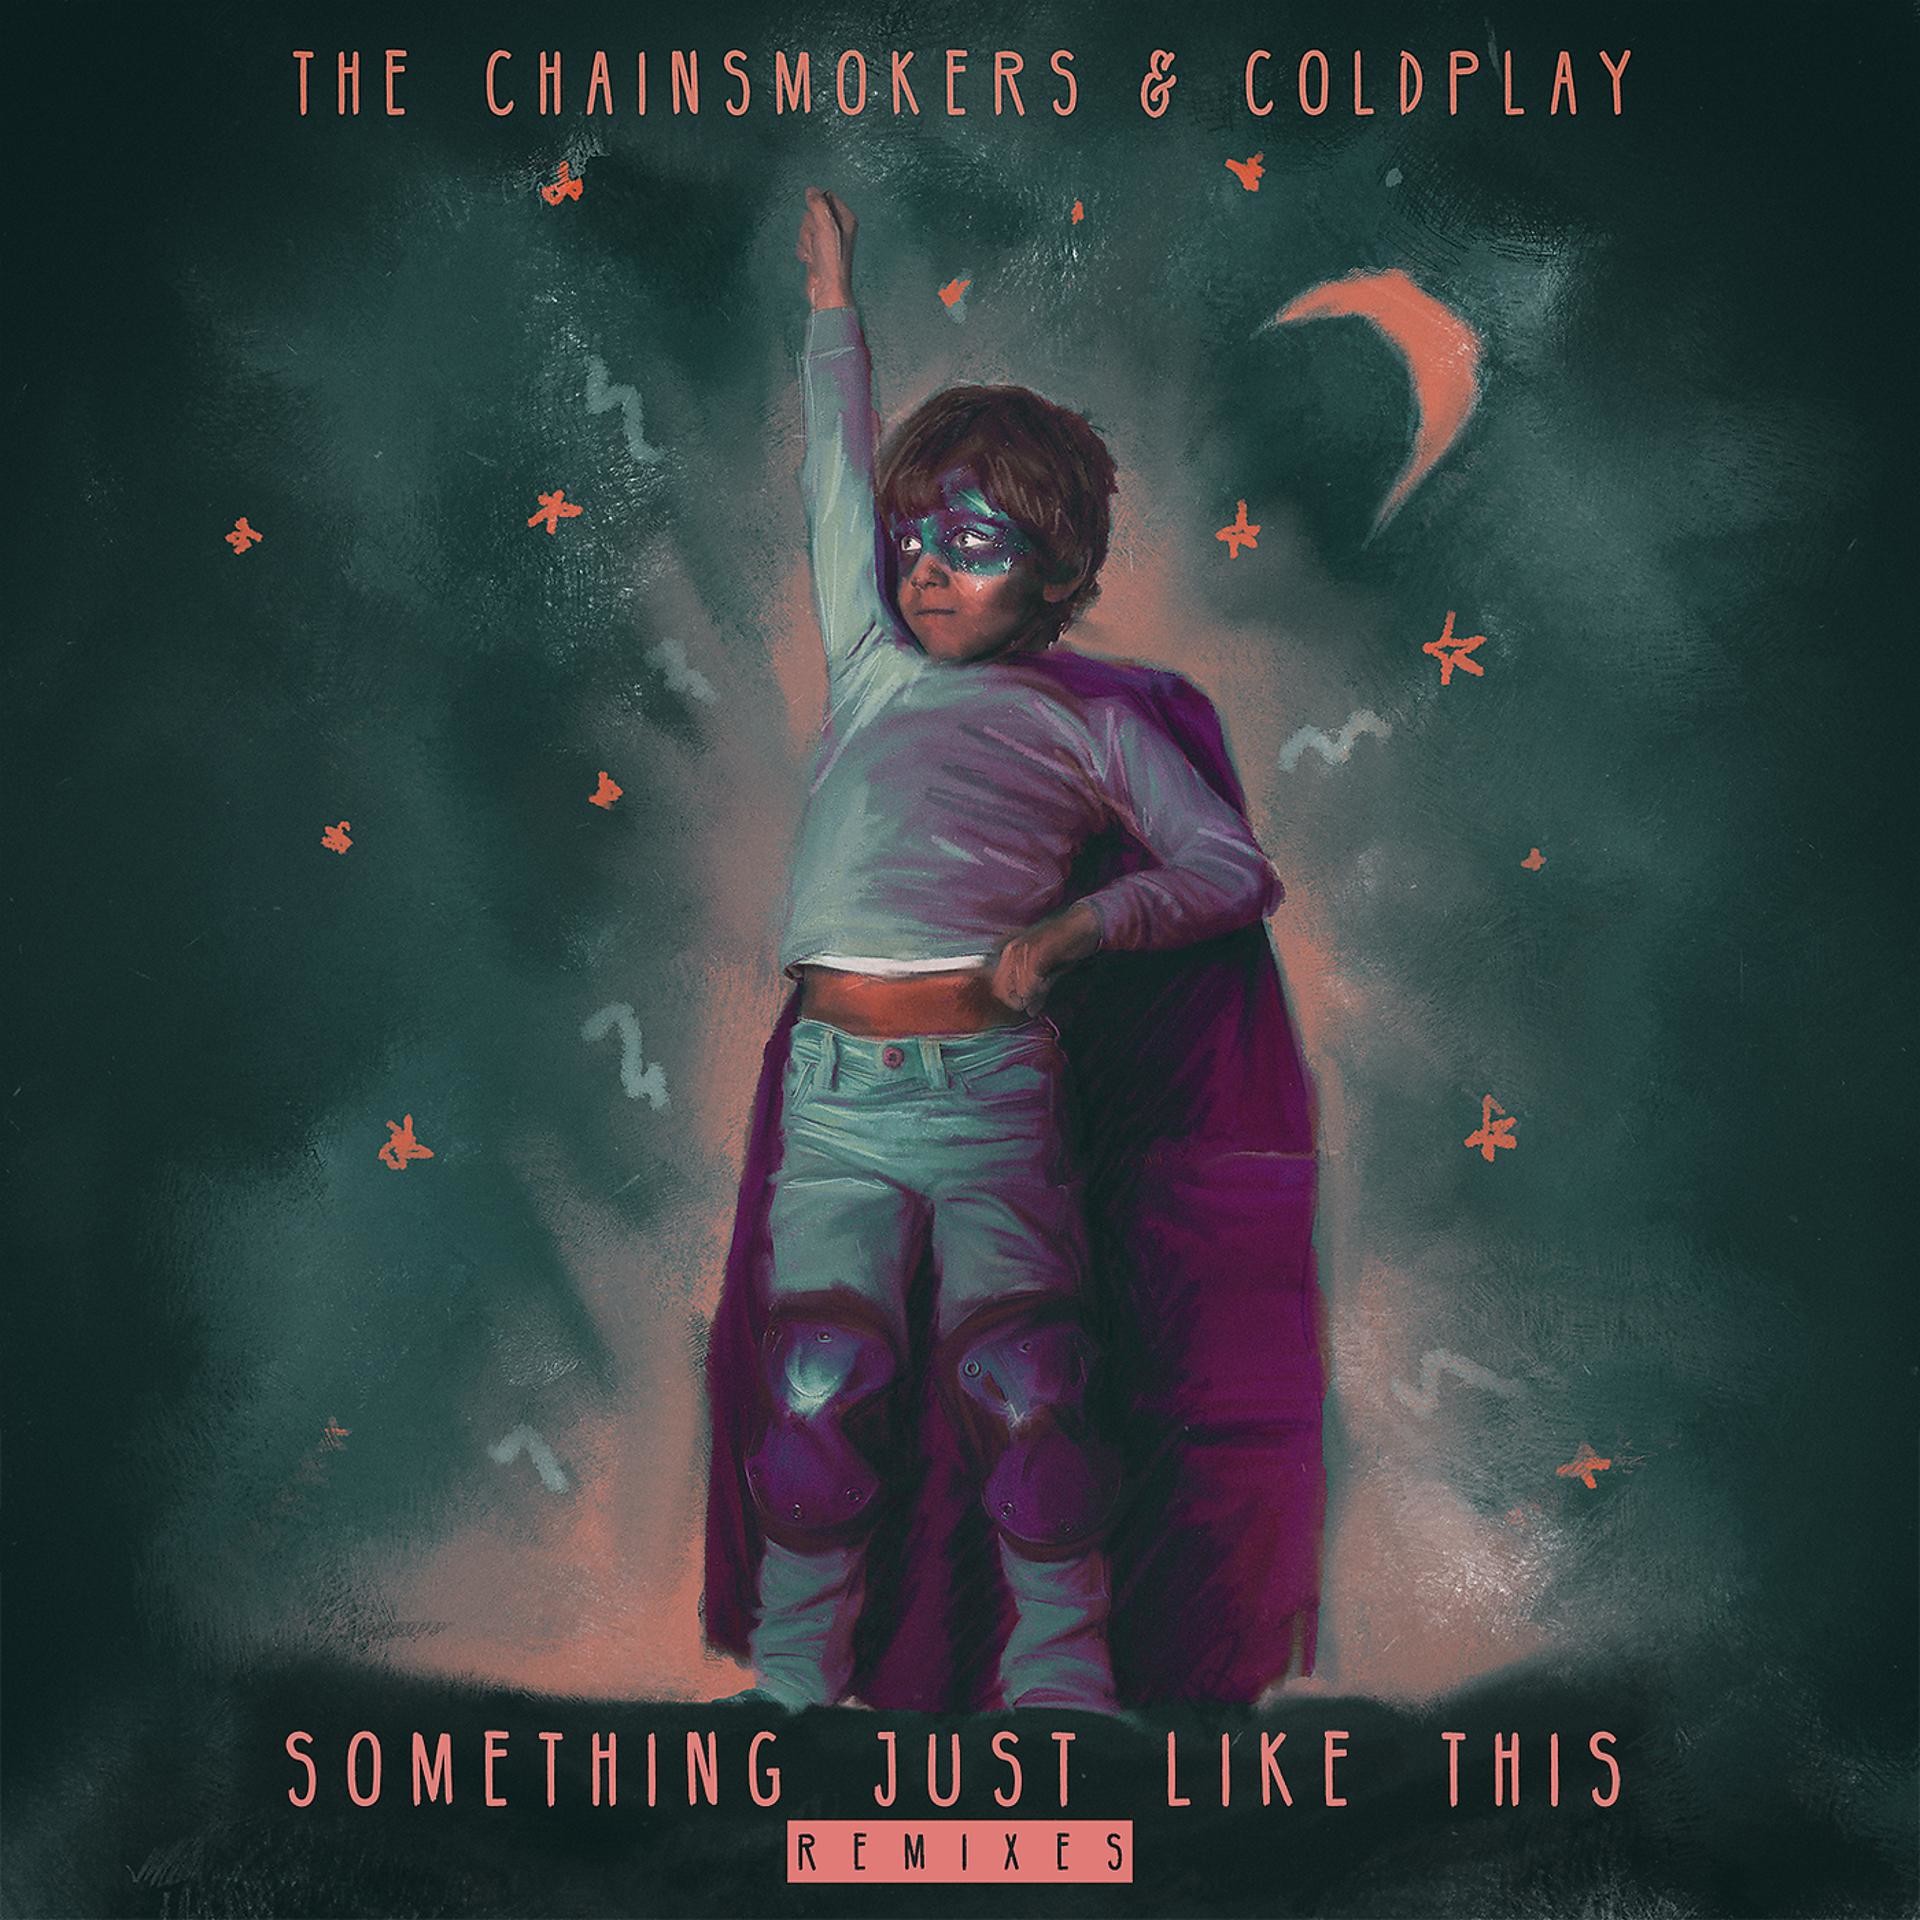 Don mp3 remix. The Chainsmokers Coldplay something just like this. Chainsmokers обложка. Something just like this обложка. The Chainsmokers обложка альбома.